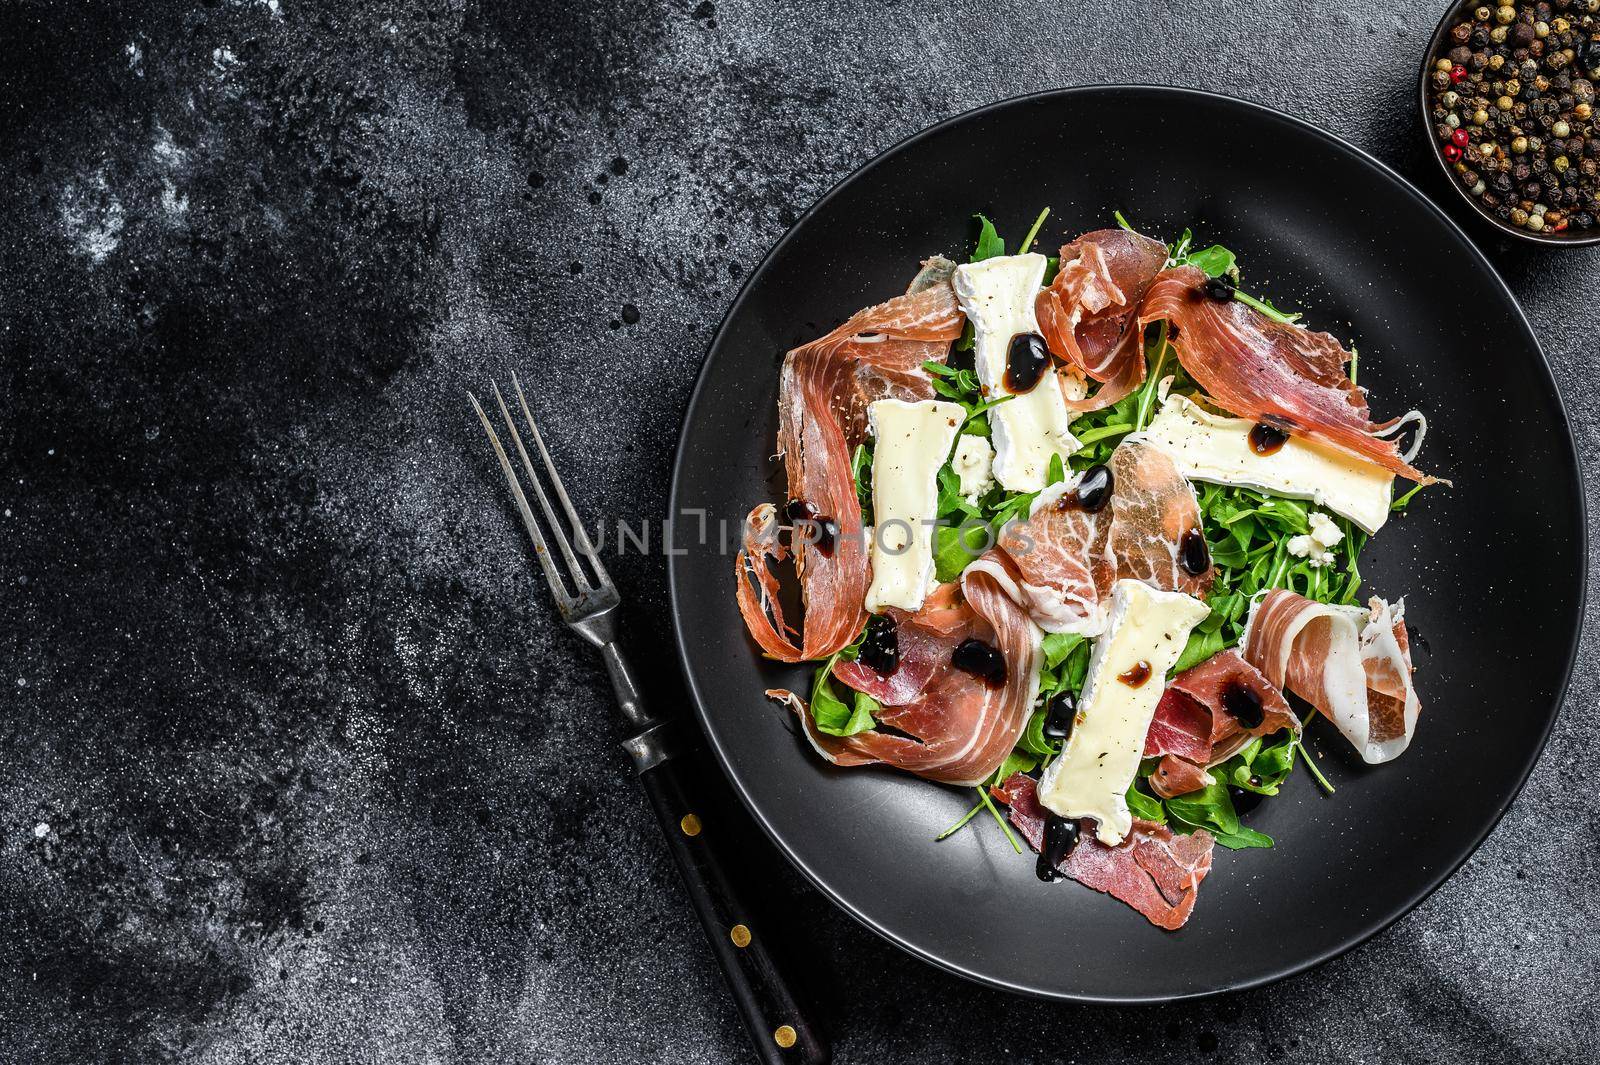 Prosciutto crudo ham salad with brie camembert cheese and arugula on a plate. Black background. Top view. Copy space by Composter